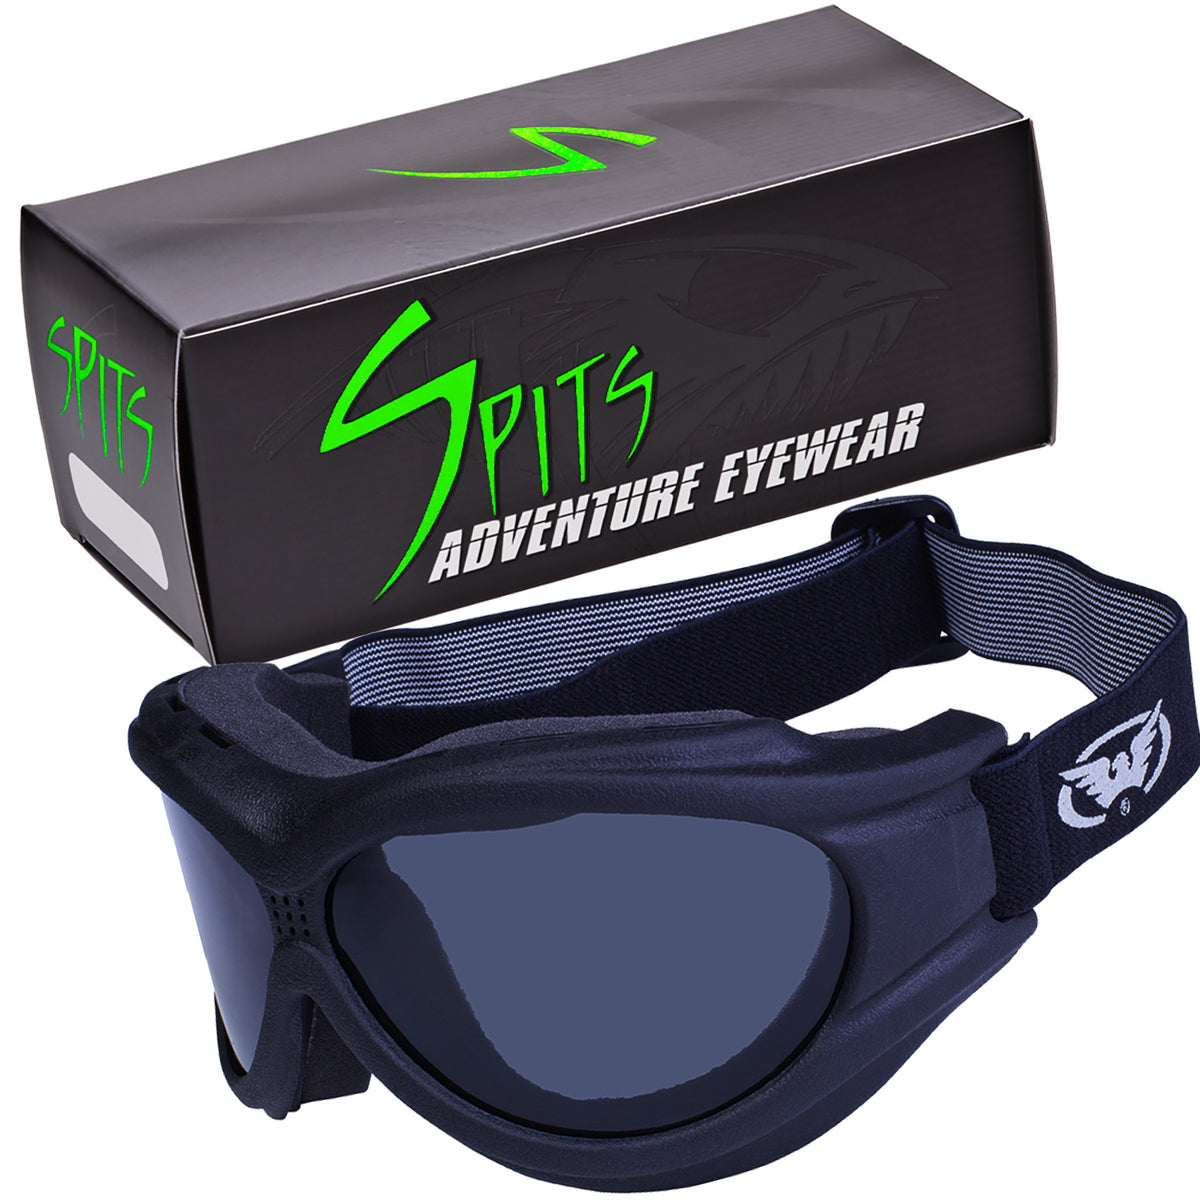 Big Ben Jr Goggles for Kids or Very Small Face Shapes